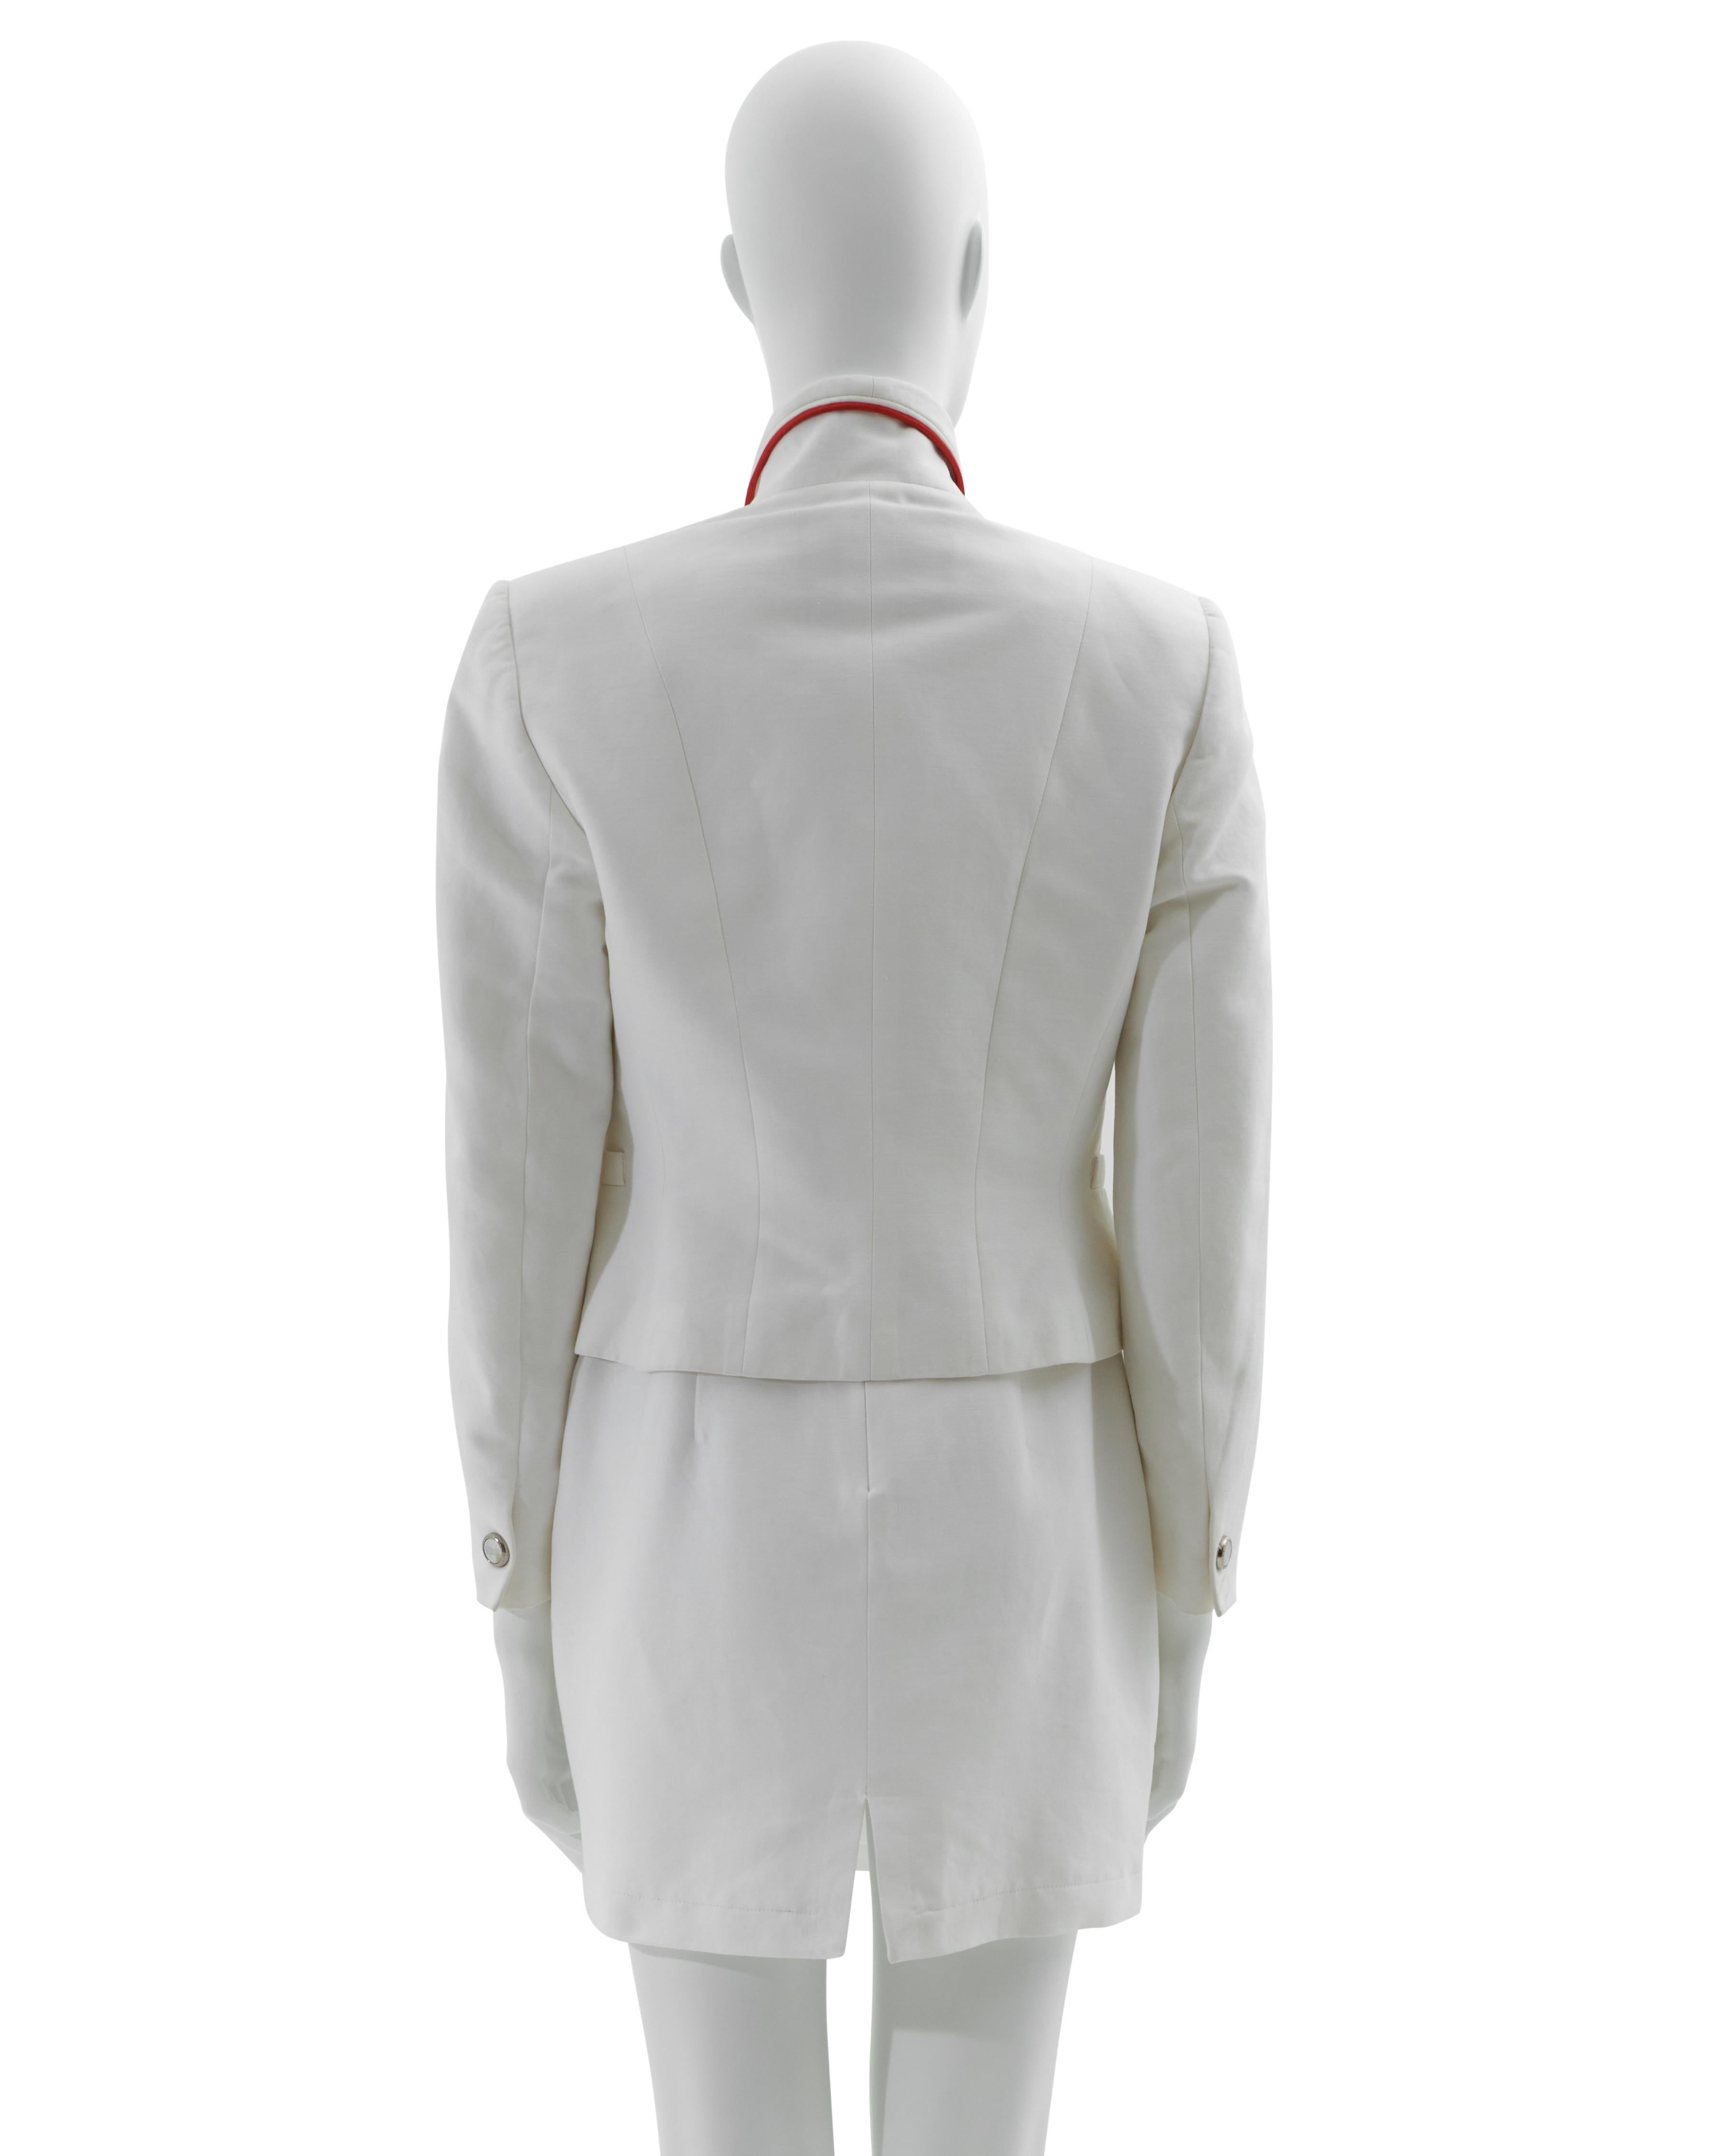 Versus by Gianni Versace Early 1990s White cotton dress and crop jacket set In Excellent Condition For Sale In Milano, IT